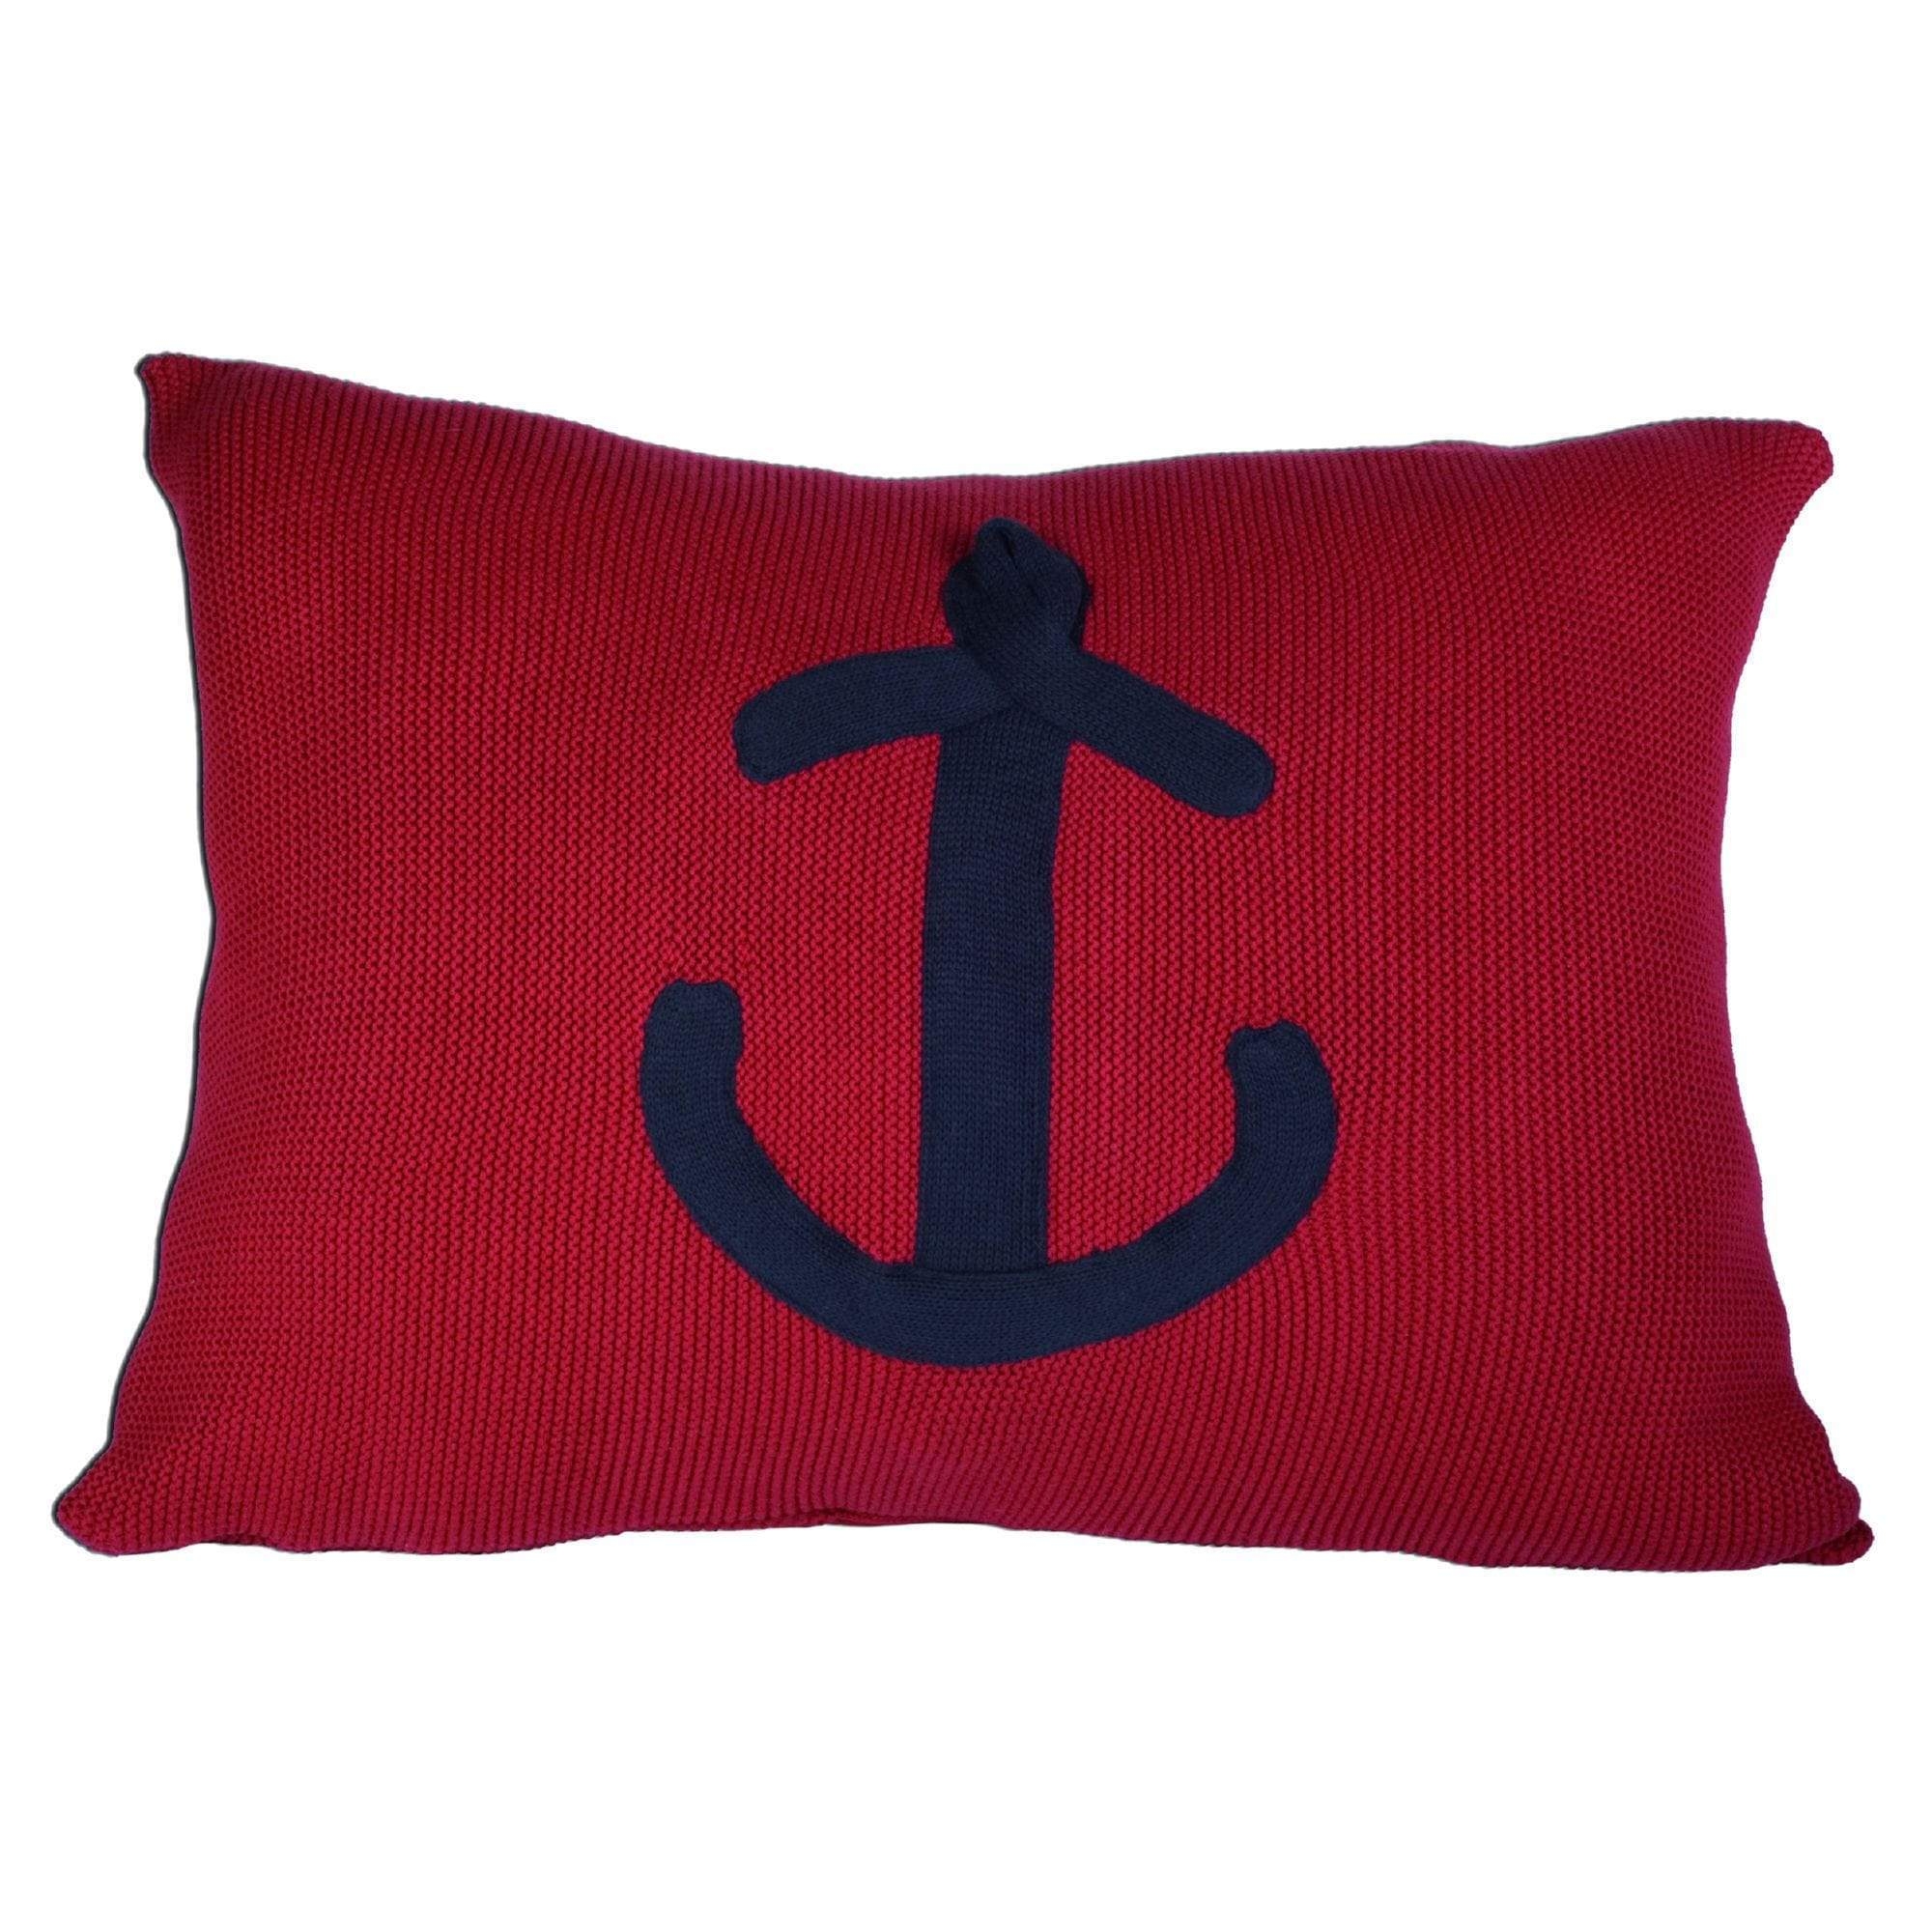 Red with Navy Anchor Cushion